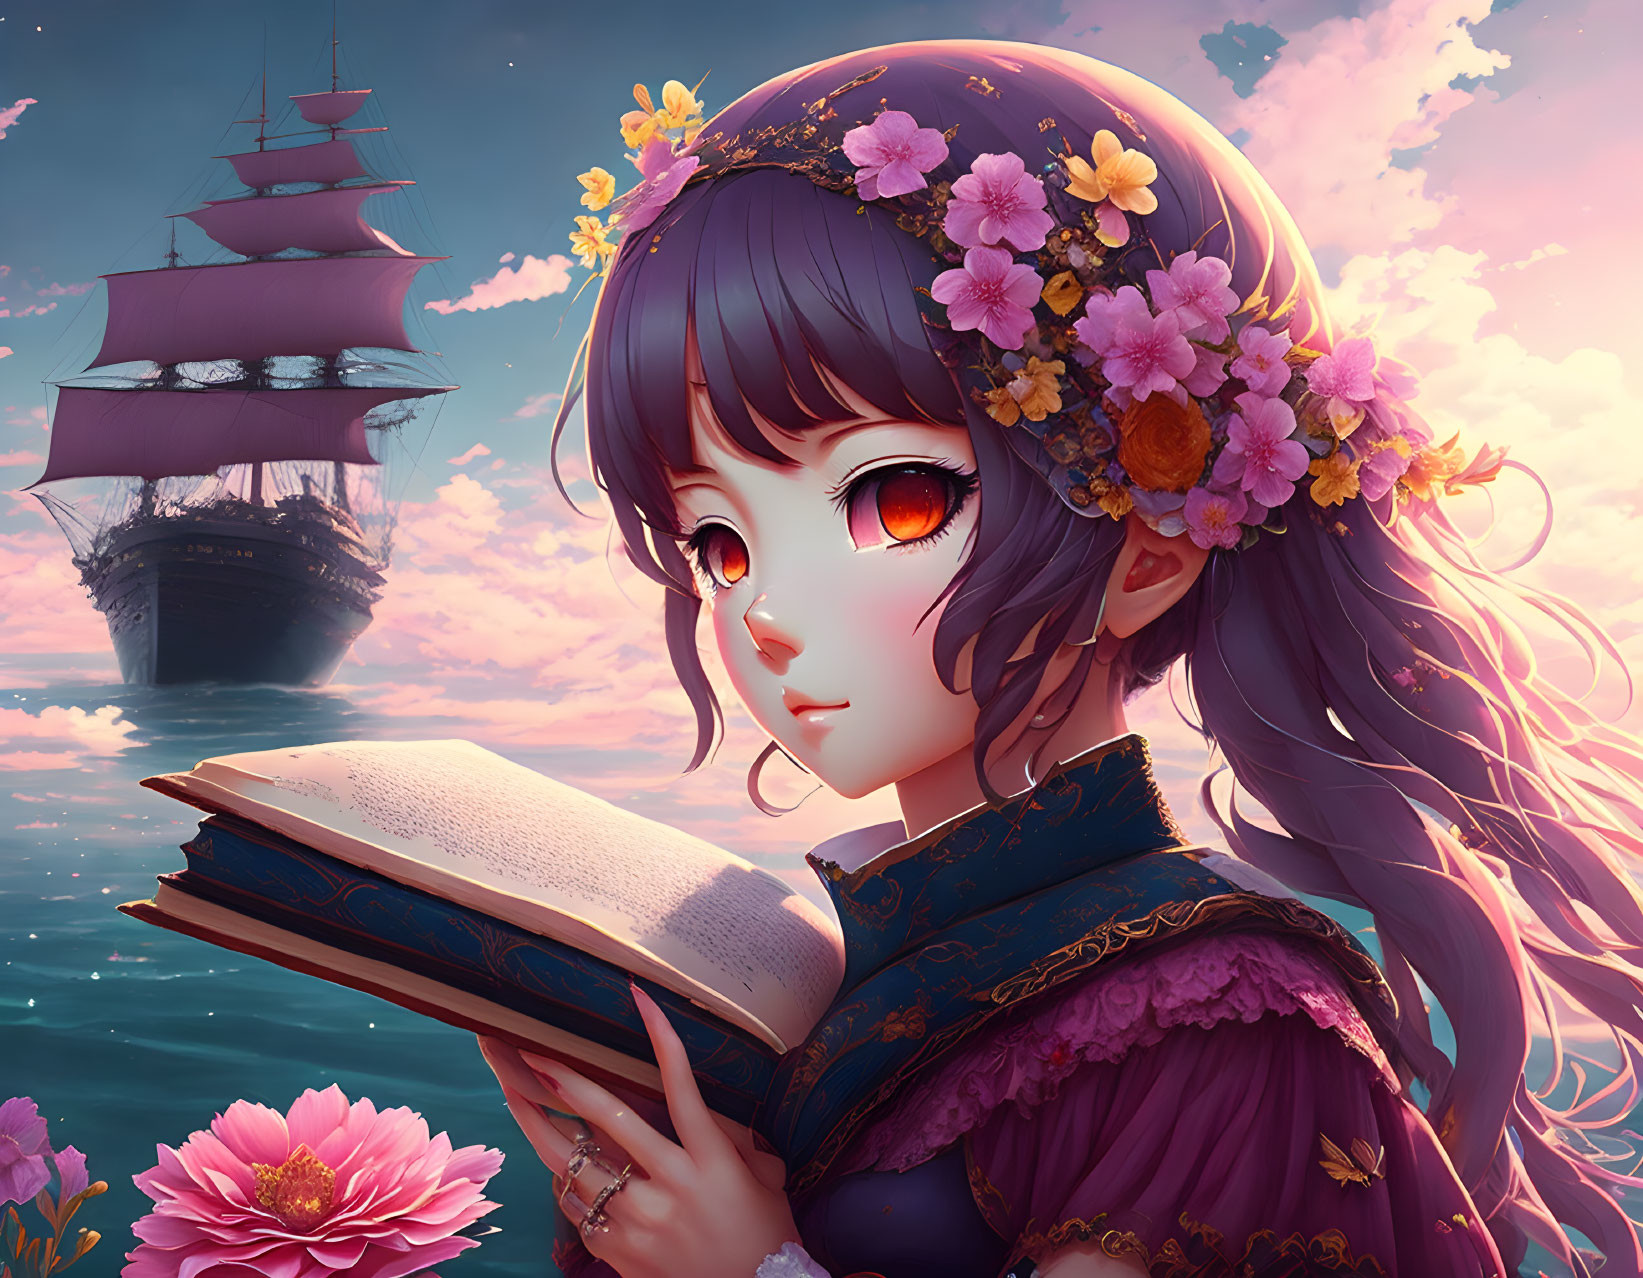 Steam Workshop::Anime Girl With Book